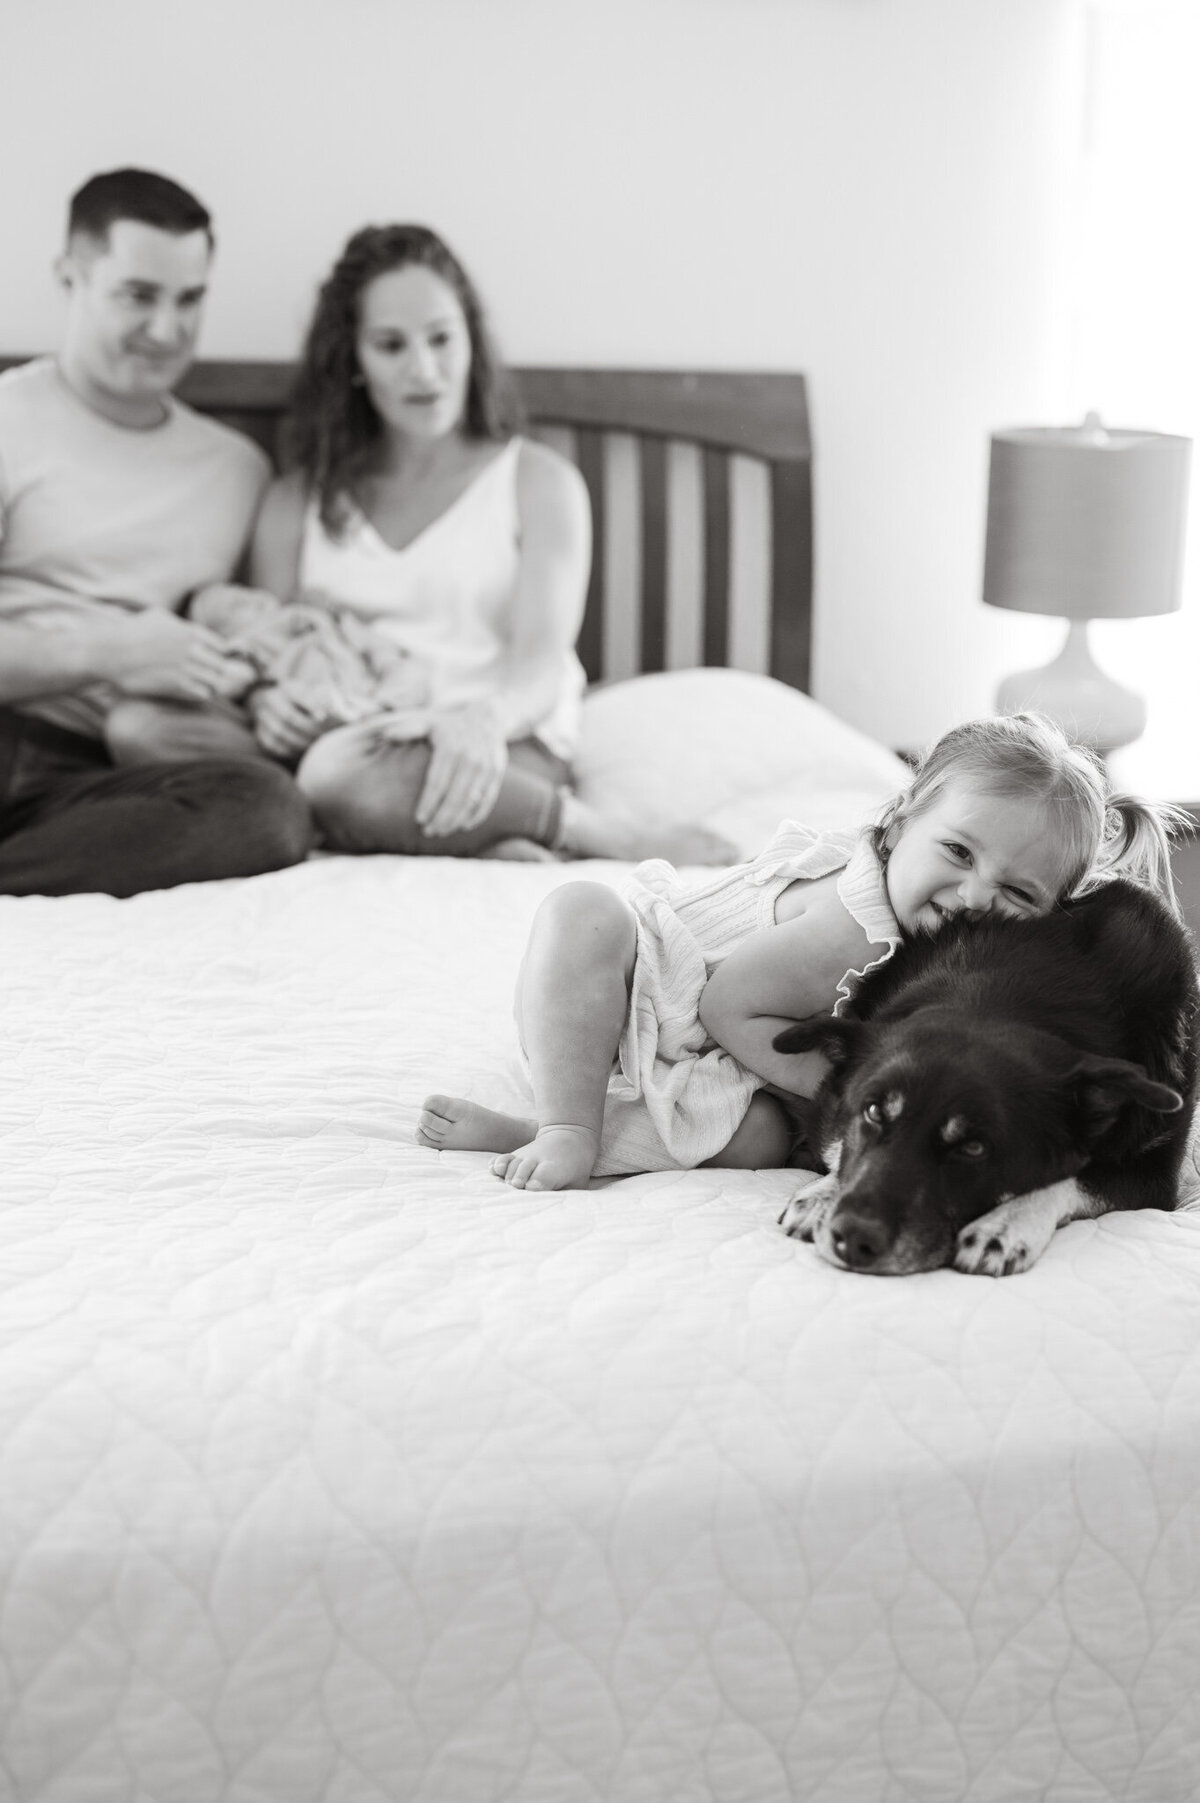 B&W newborn photography image of a toddler snuggling the unimpressed family dog while mom, dad and baby look on in the background.